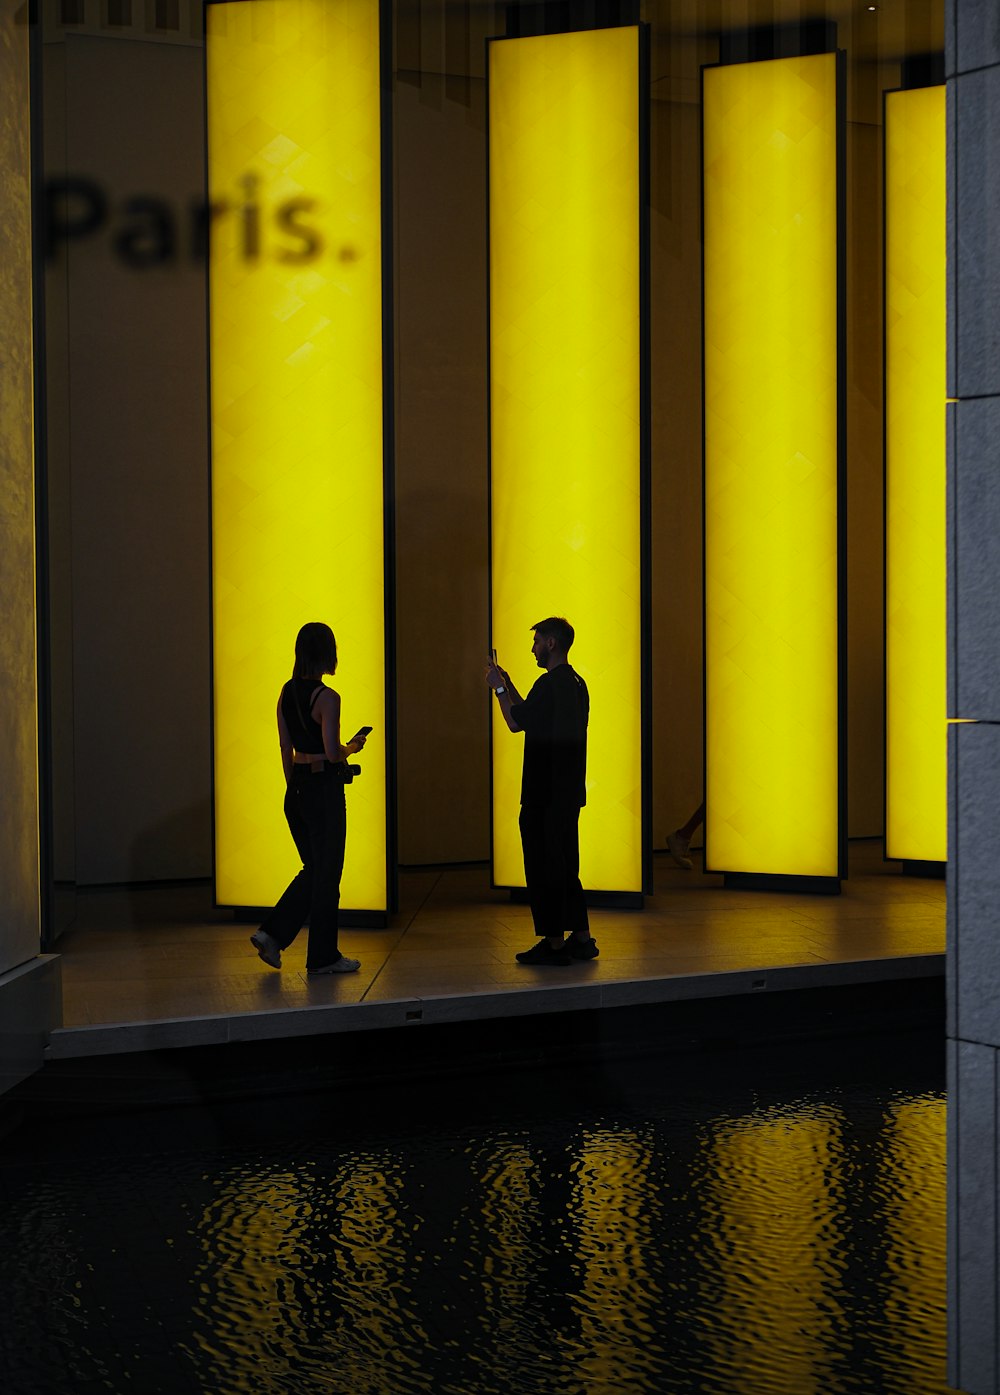 a man and woman standing in a hallway with yellow pillars